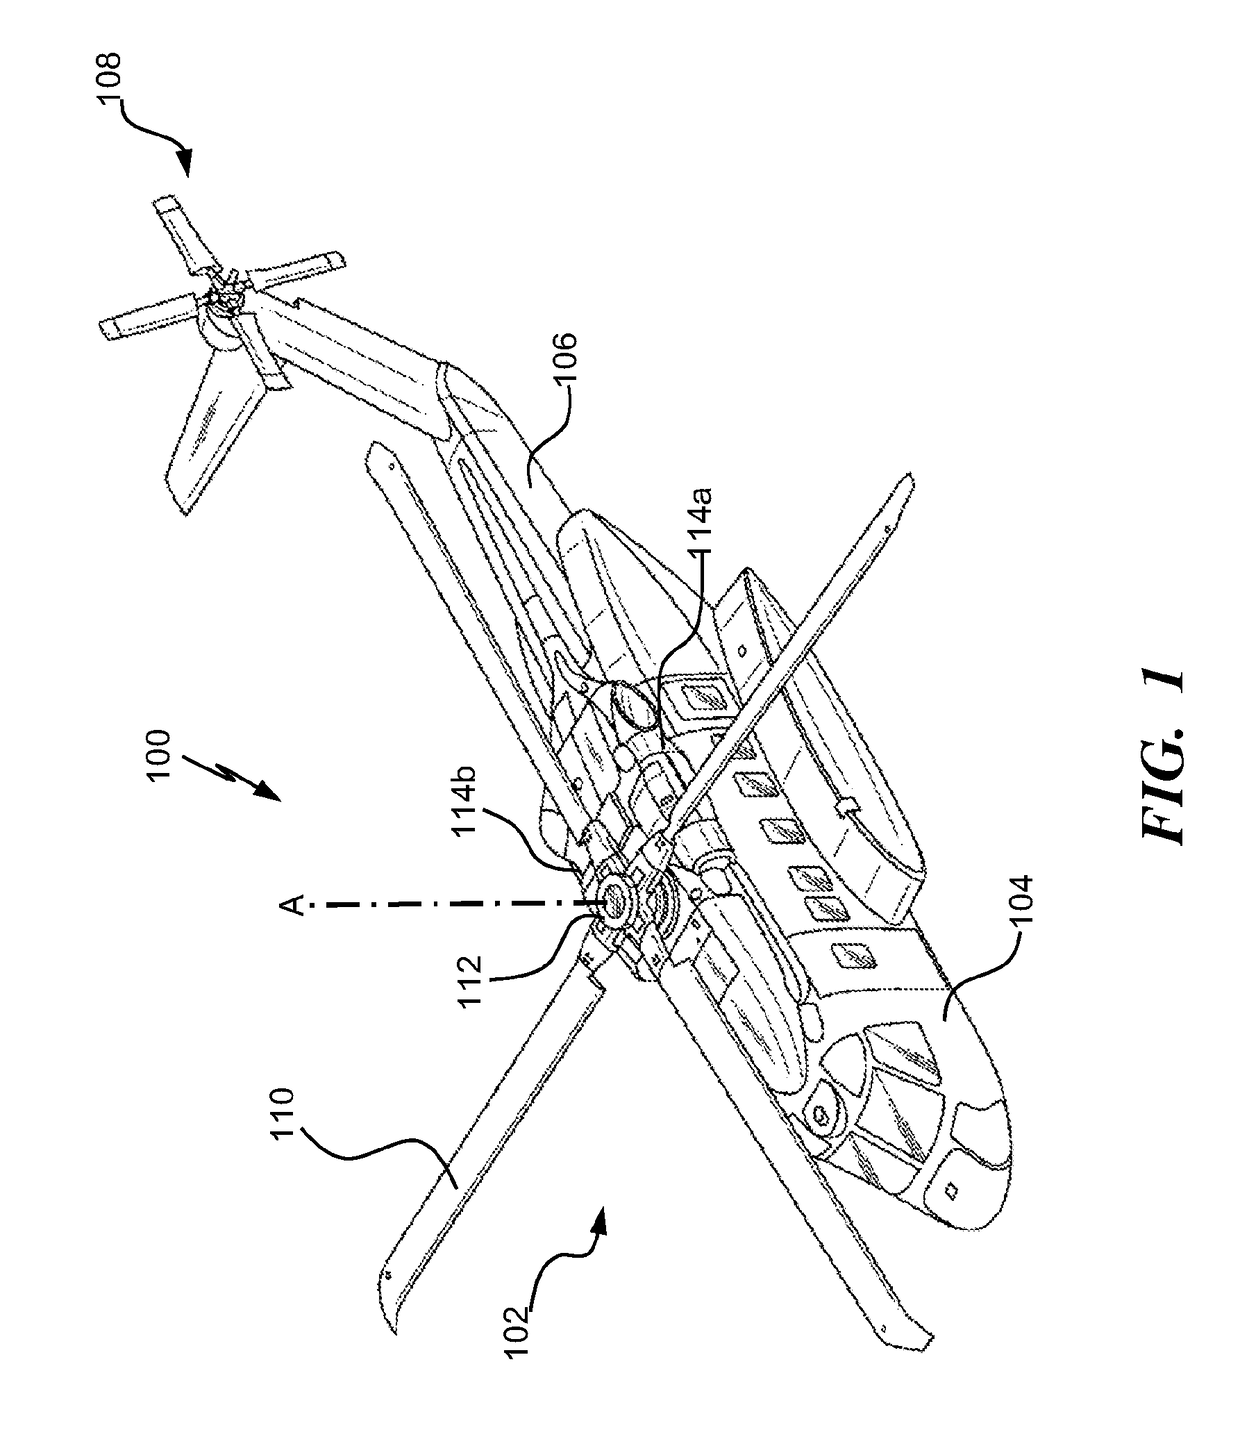 Hybrid electric power drive system for a rotorcraft